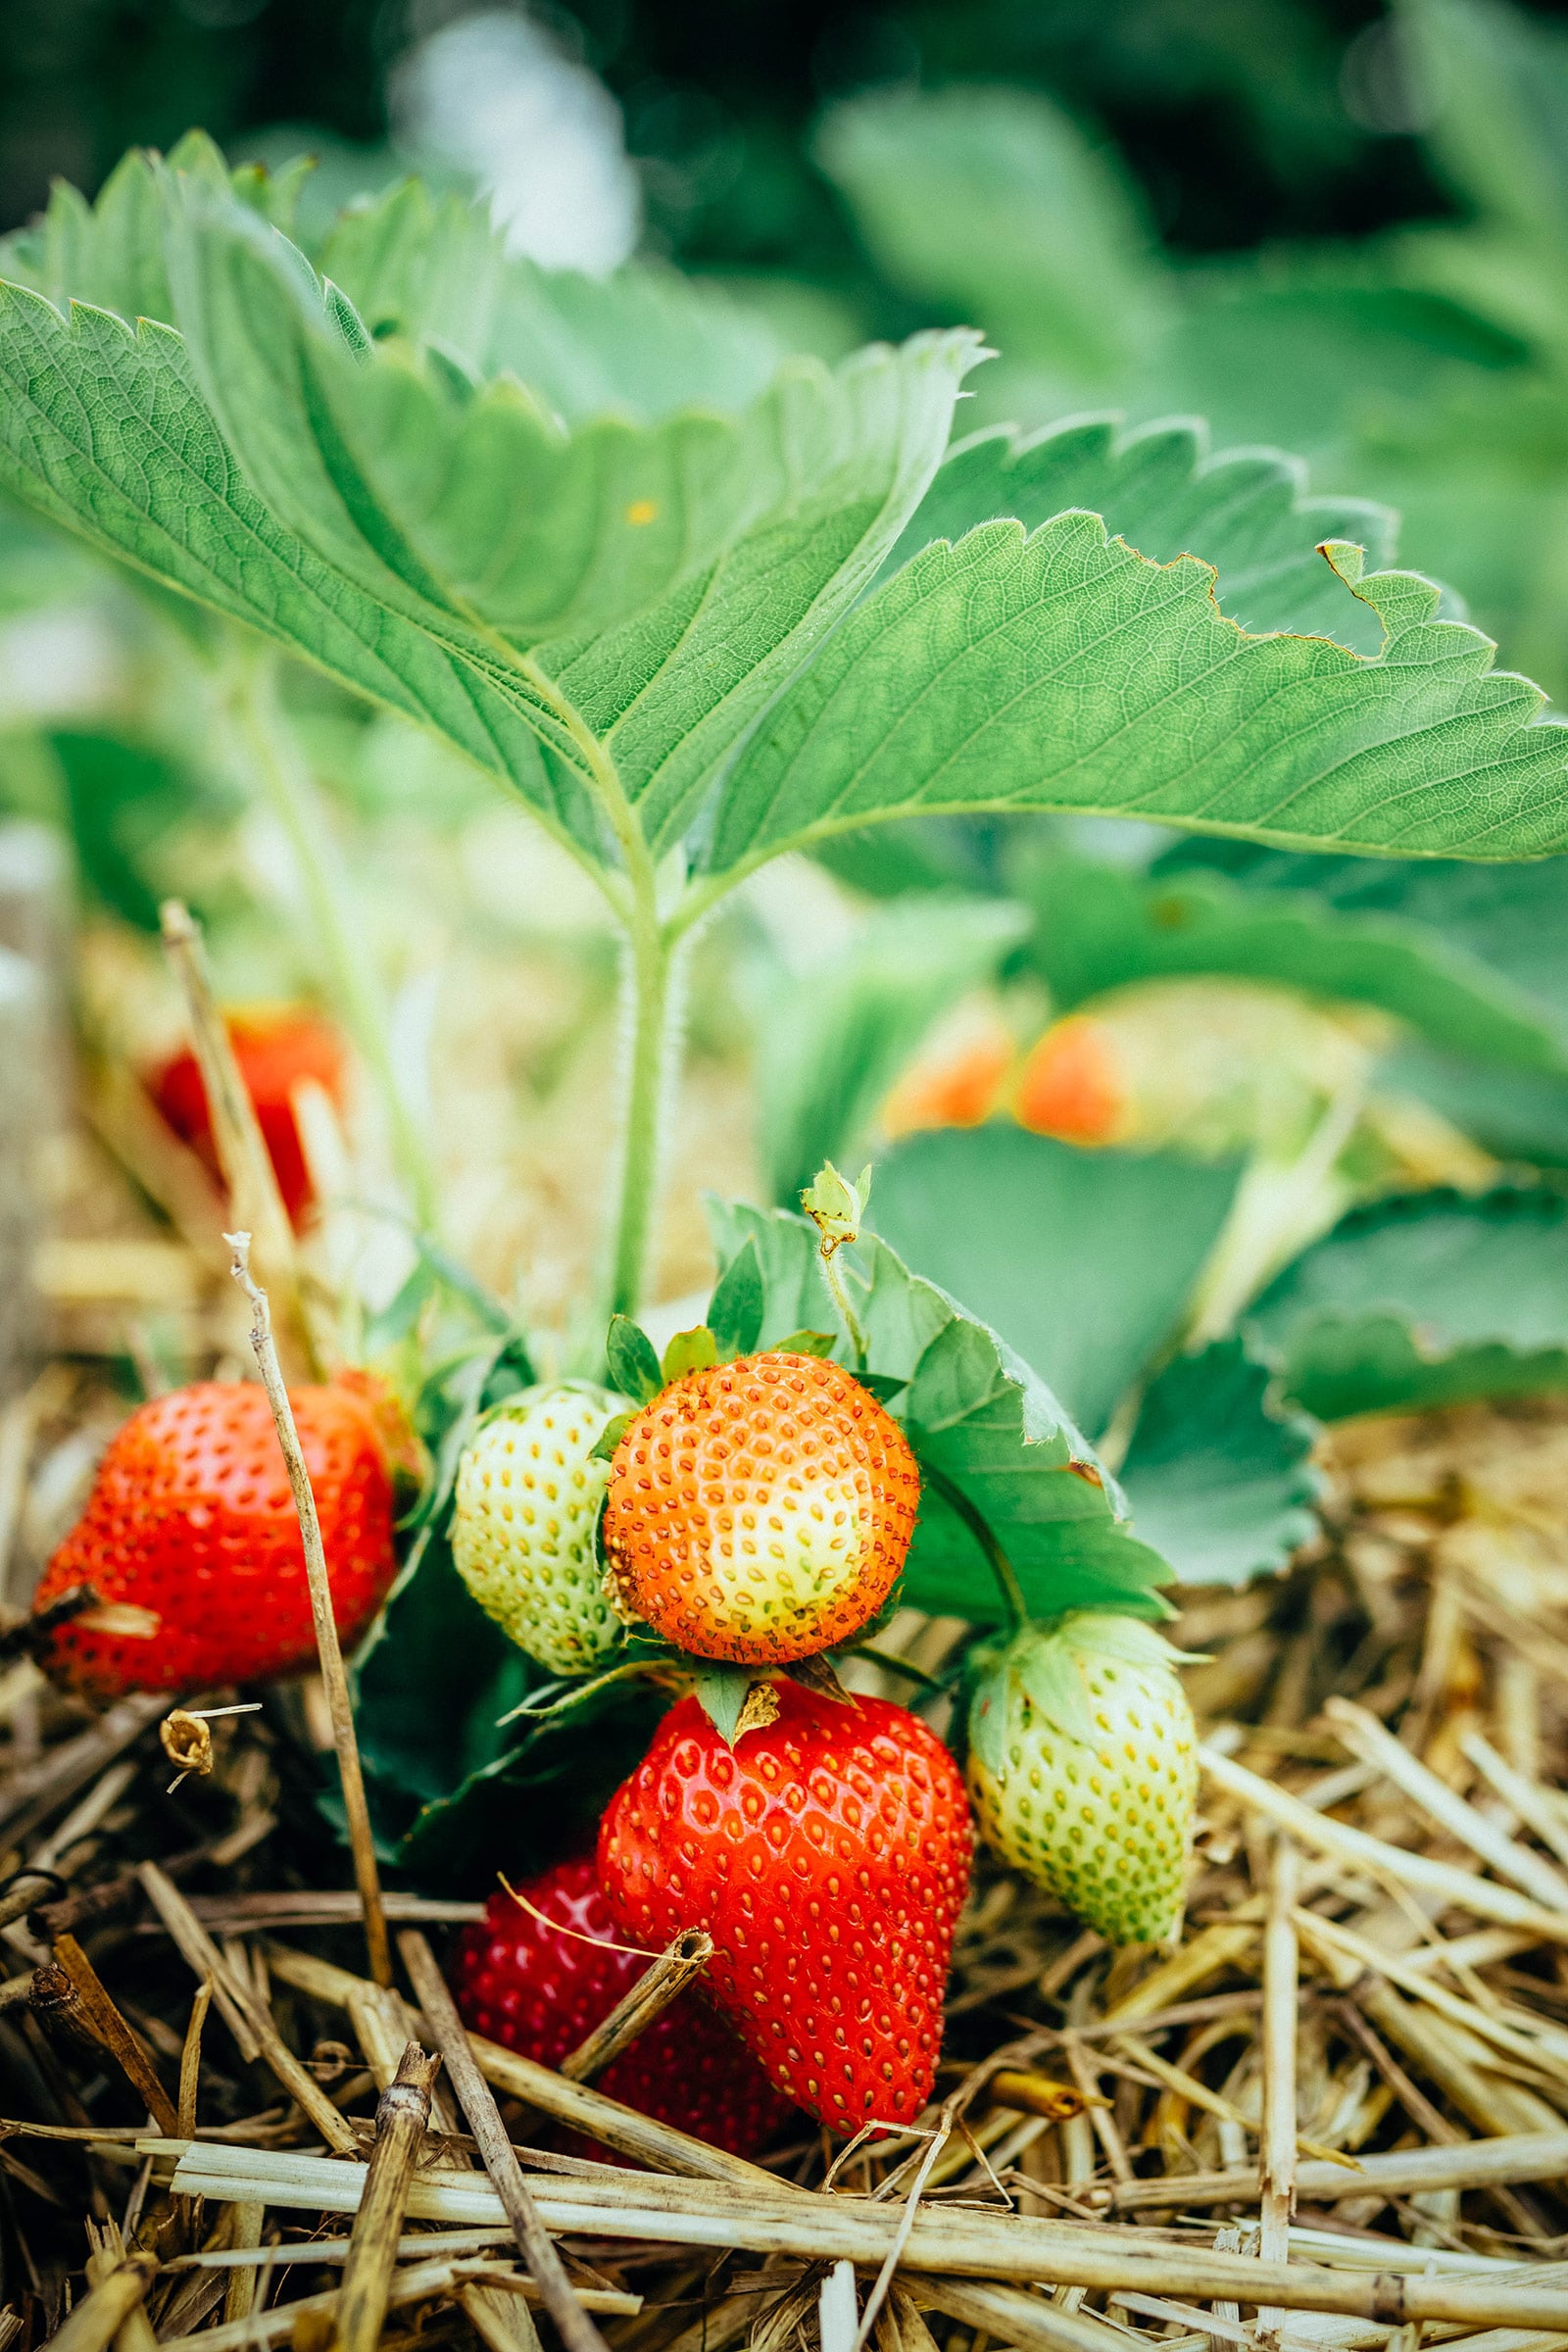 Strawberry plant bearing ripe and unripe berries, with straw mulch underneath them